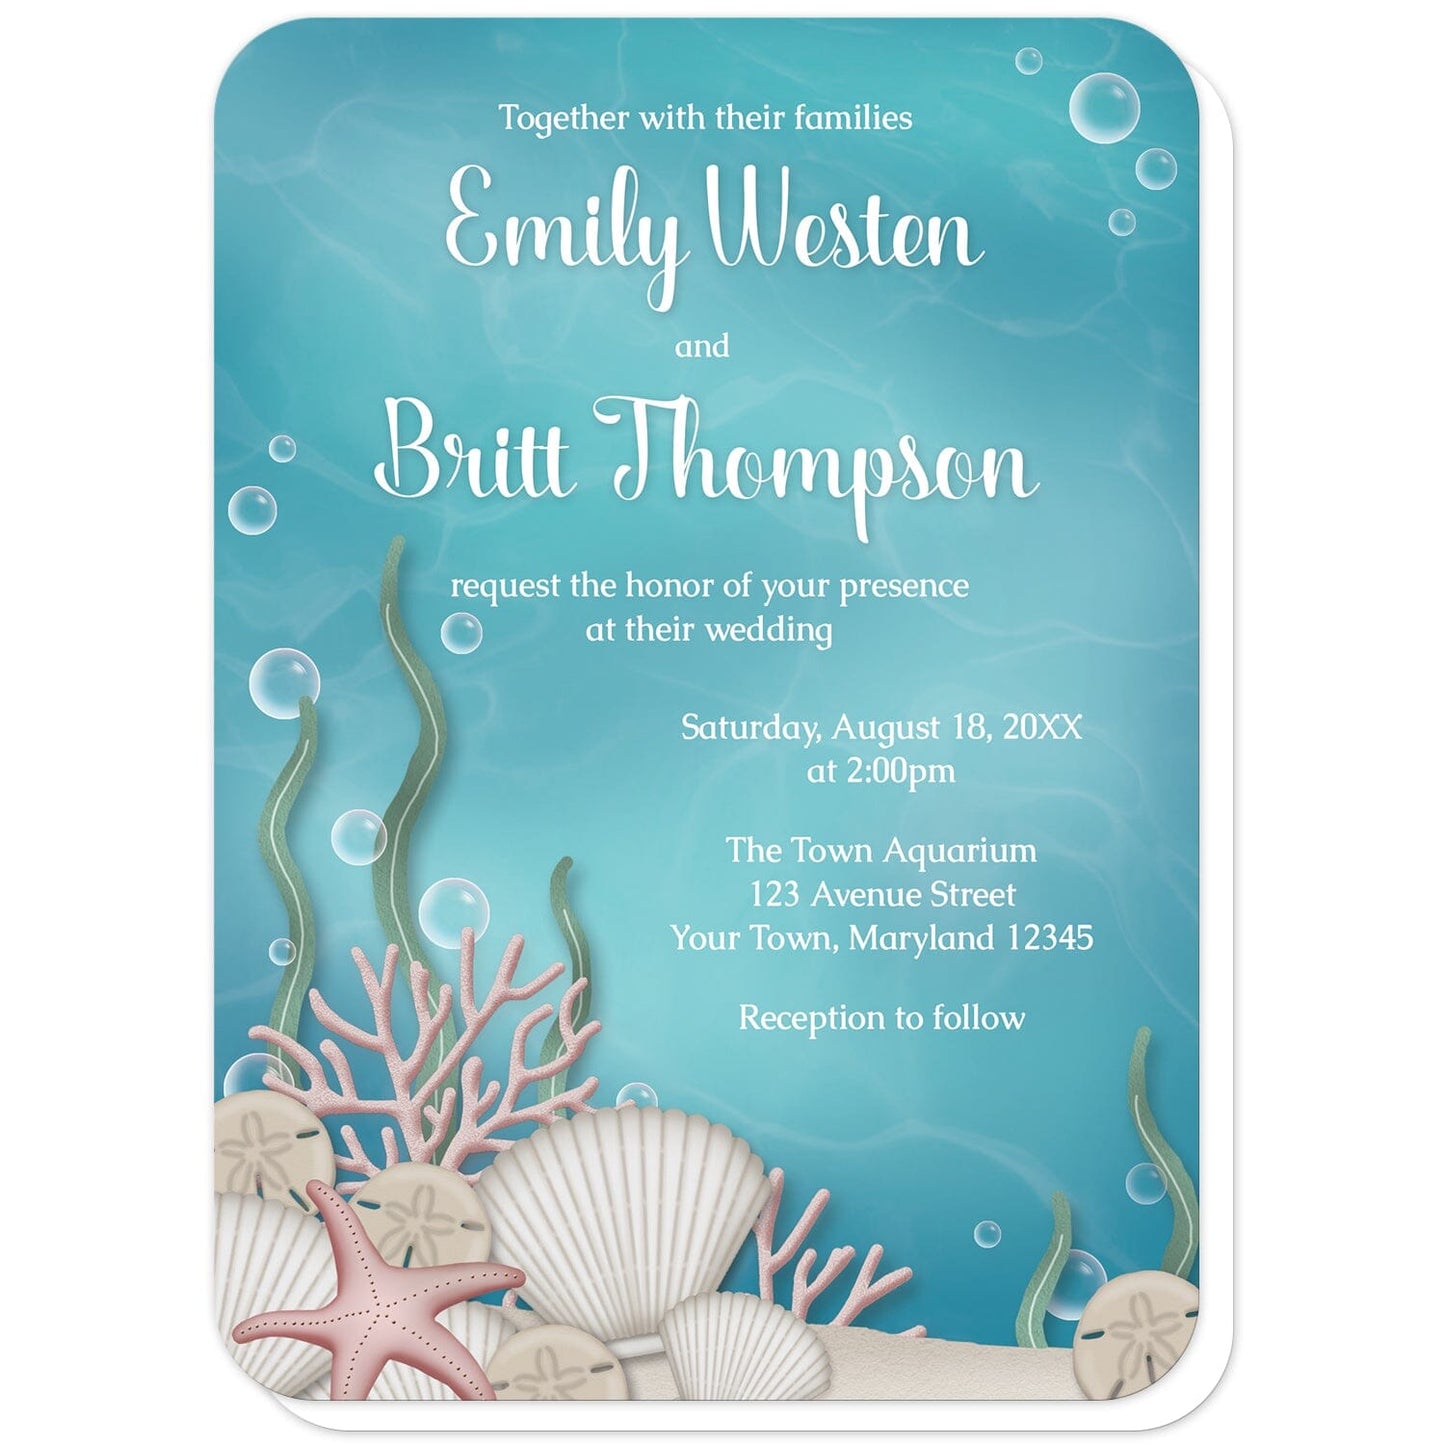 Whimsical Under the Sea Wedding Invitations (with rounded corners) at Artistically Invited. Uniquely illustrated whimsical under the sea wedding invitations designed with a sandy seabed, assorted seashells, coral, kelp, and little bubbles over an aqua blue water background. Your personalized marriage celebration details are custom printed in white over the underwater background.